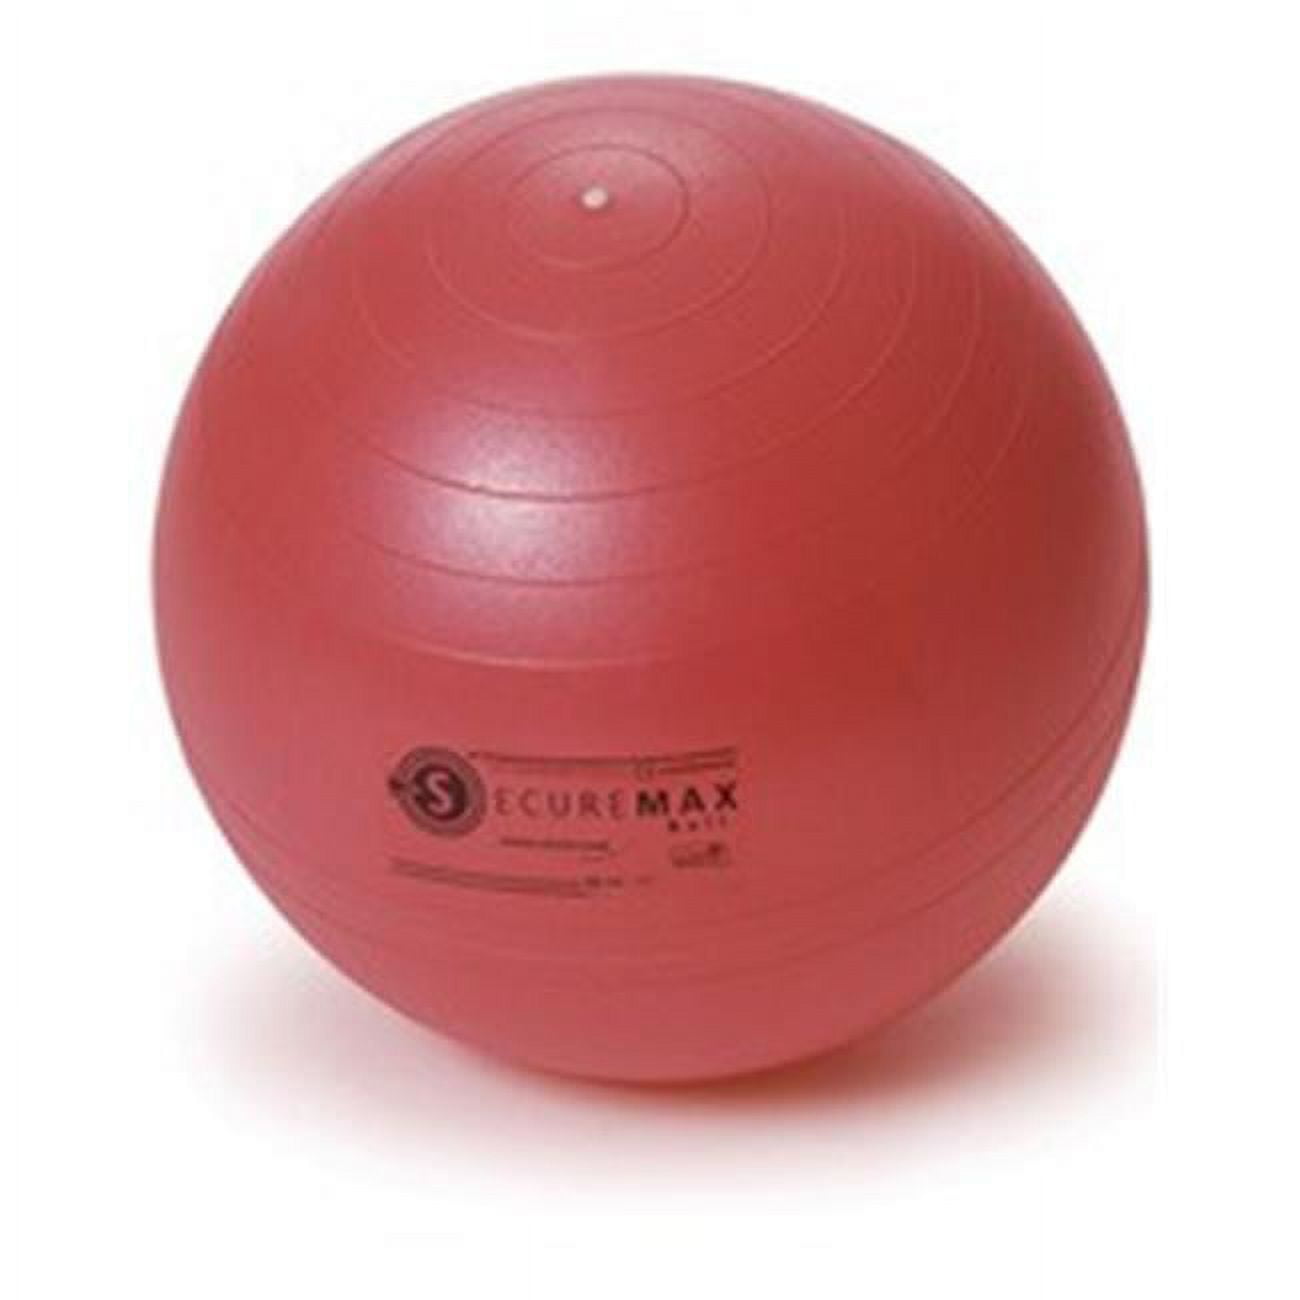 Sissel 160.011 Securemax Ball, Red - 55 cm